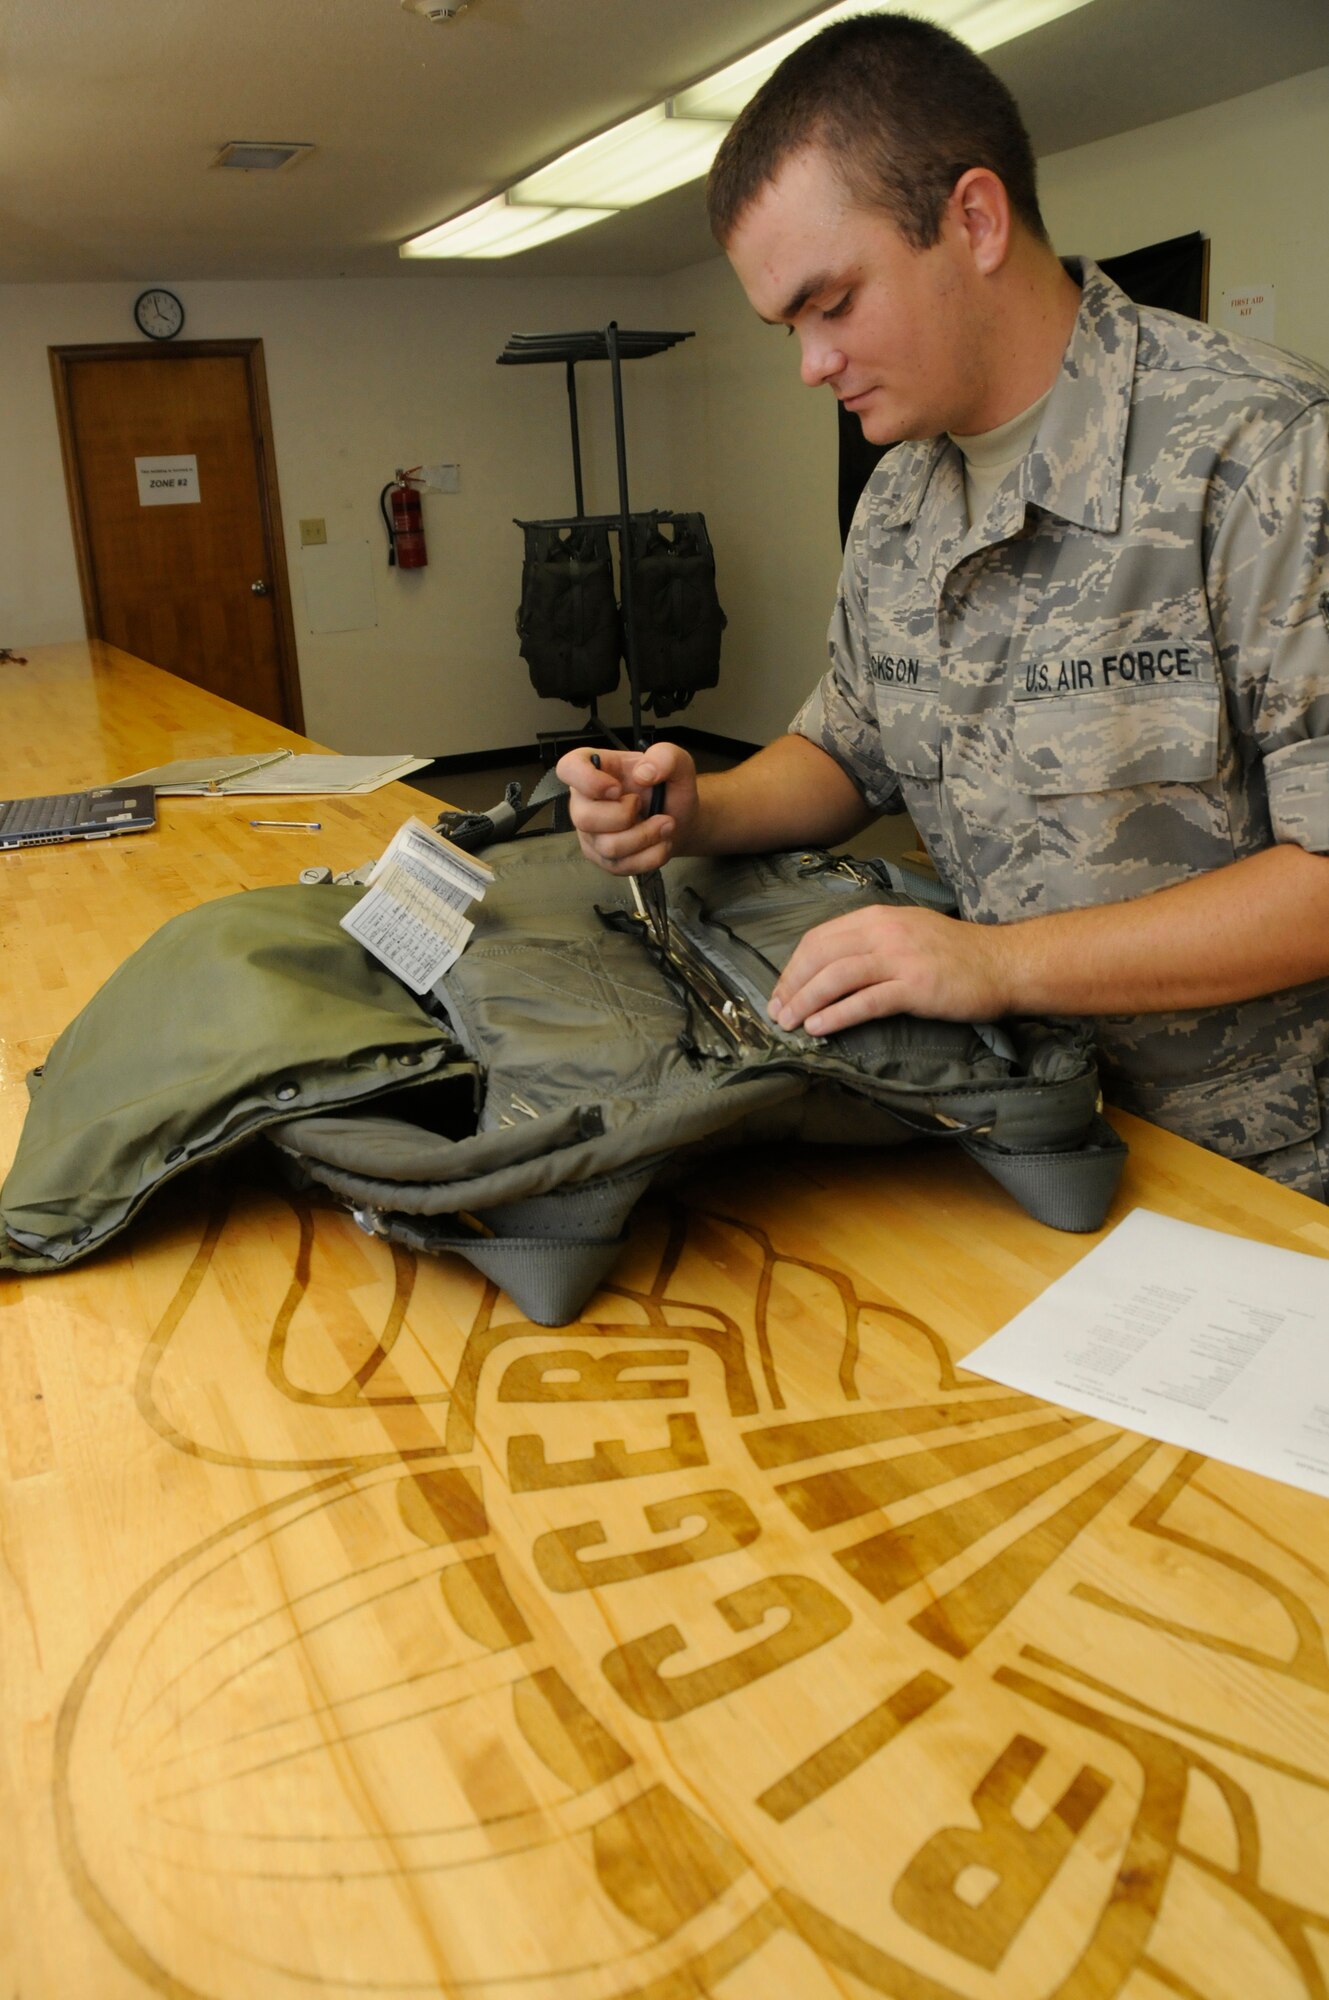 Senior Airman Michael Jackson, assigned to the 379th Expeditionary Operations Support Squadron, uses pliers to set ripcord pins of a BA22 automatic back parachute Aug. 30, 2008, at an undisclosed air base in Southwest Asia. Airman Jackson and other aircrew life support technicians assigned to the 379th EOSS ensure reliability of life support equipment for Airmen flying missions in support of Operations Iraqi Freedom, Enduring Freedom and Joint Task Force-Horn of Africa. Airman Jackson, a native of Lynchburg, Va., is deployed from Pope Air Force Base, N.C. (U.S. Air Force photo by Staff Sgt. Darnell T. Cannady)